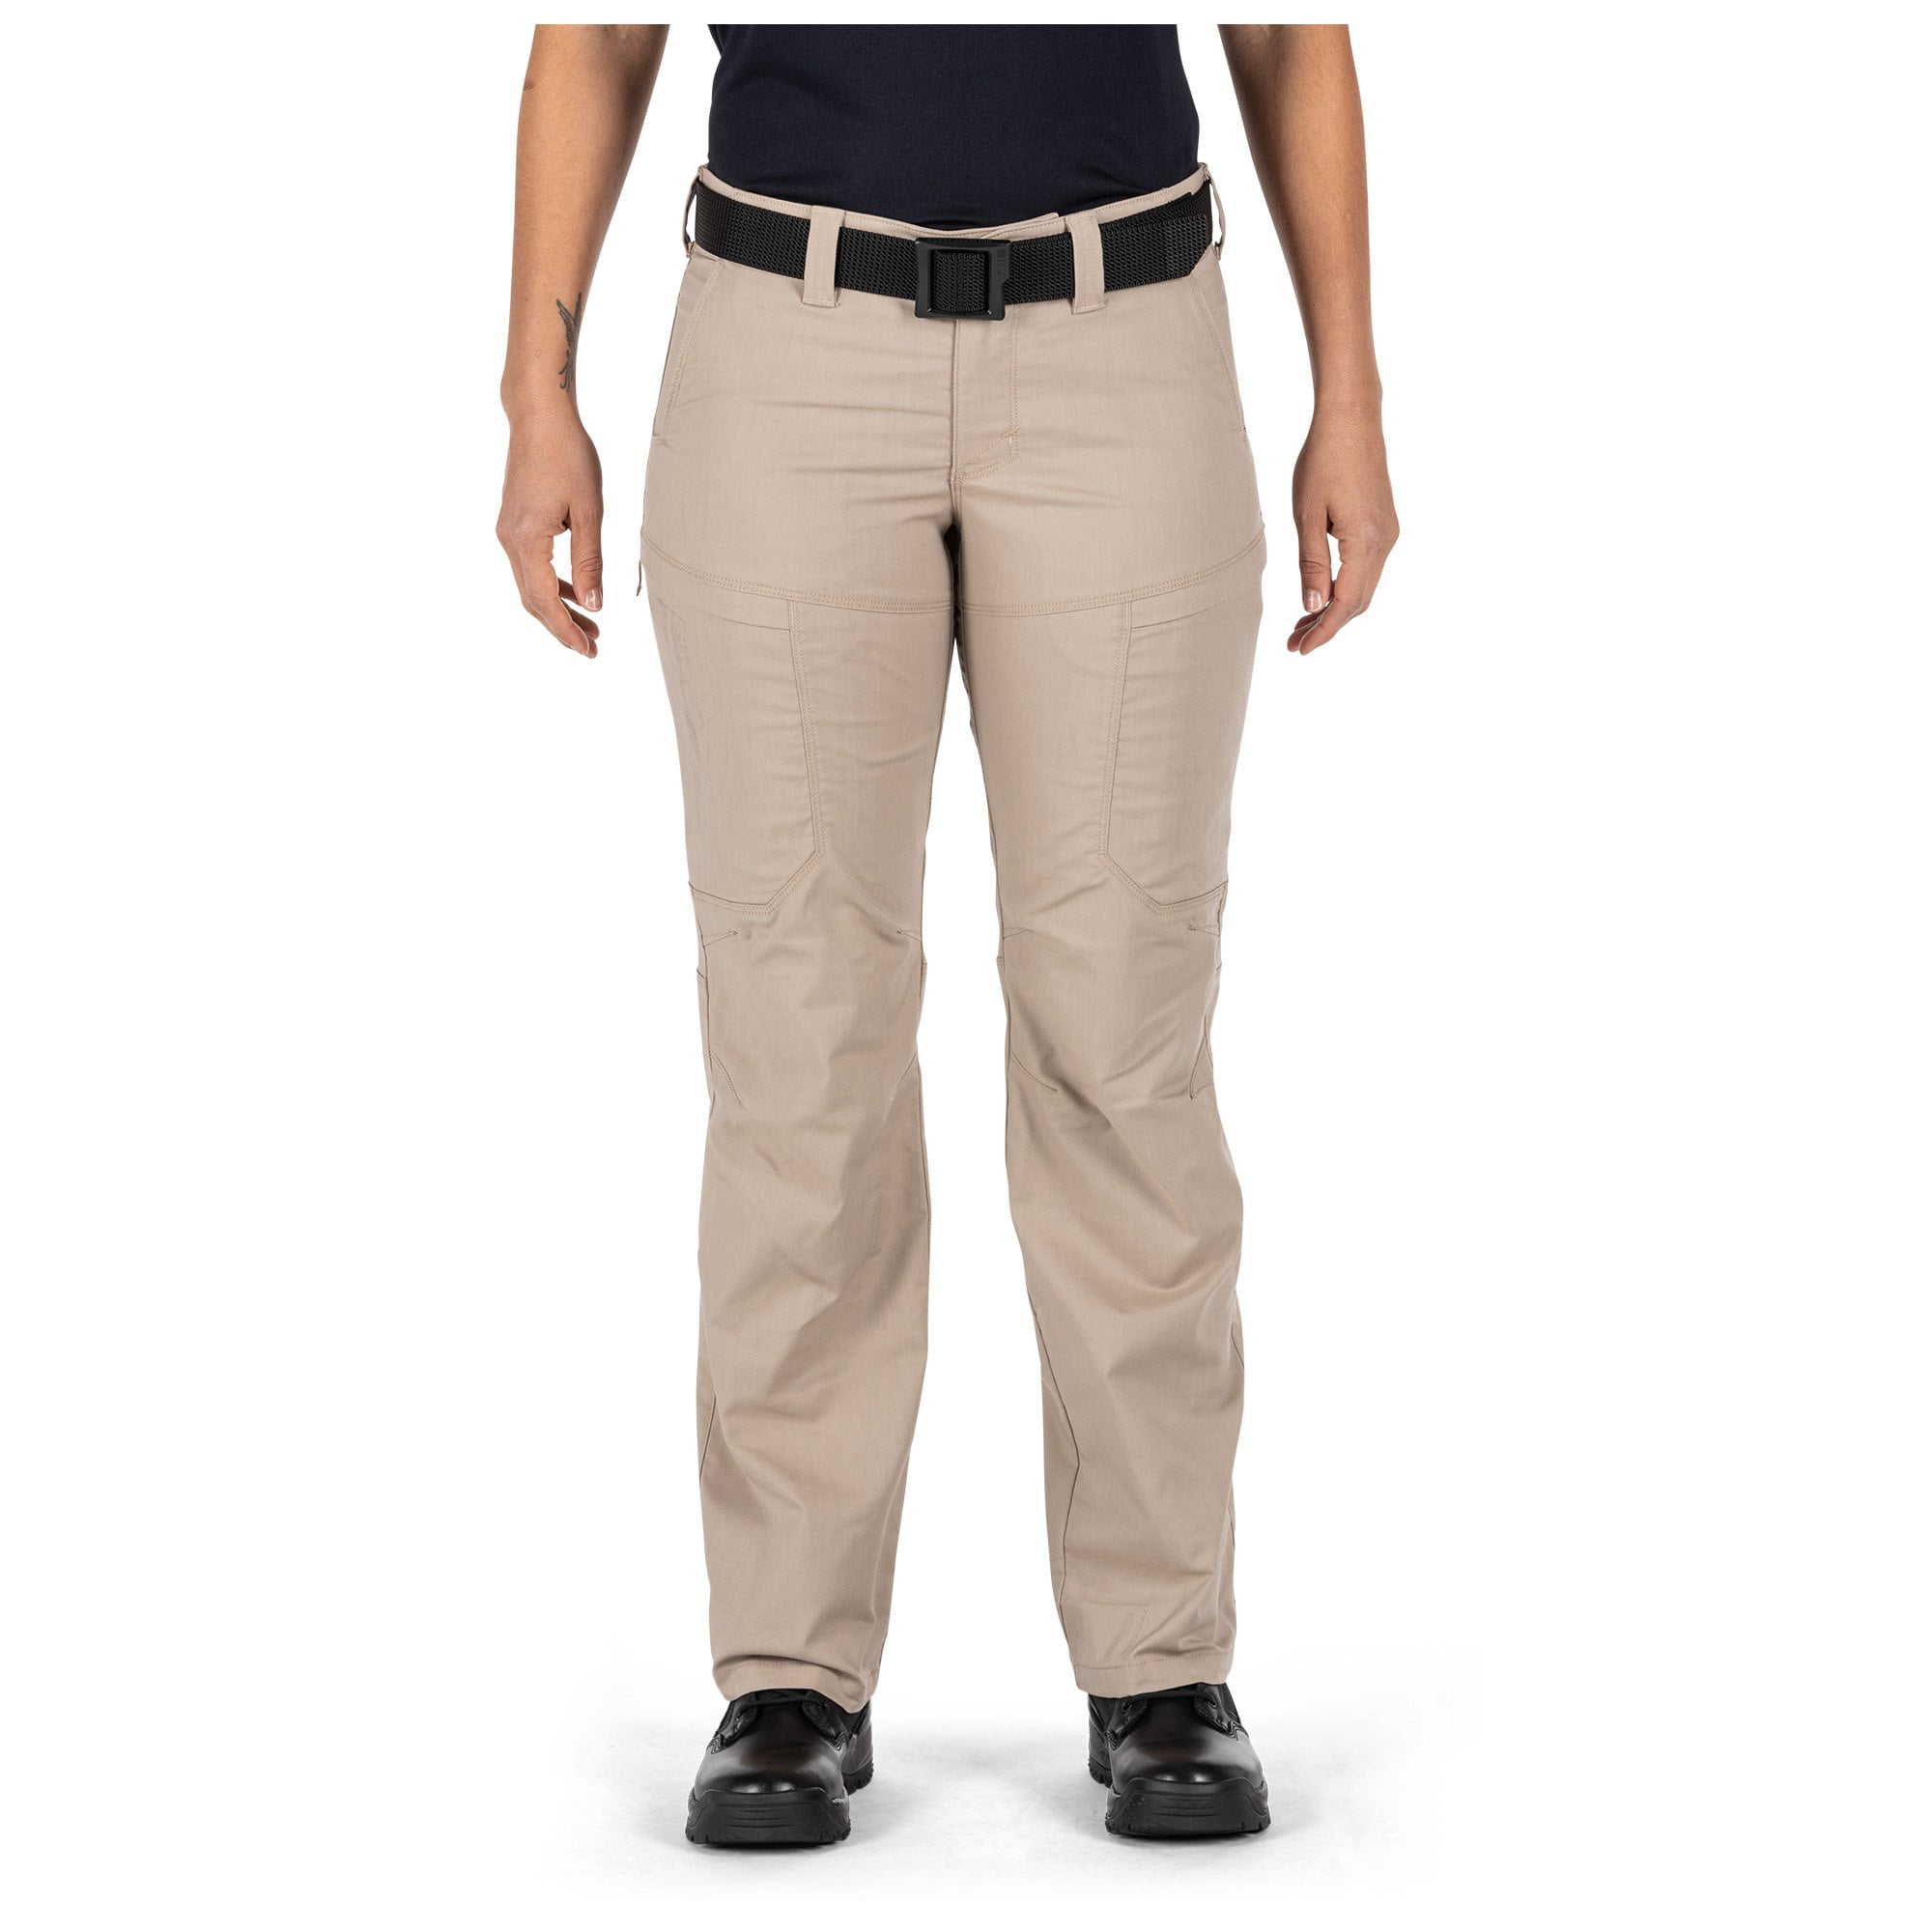 Teflon Finish Gusseted 5.11 Tactical Women's Apex Cargo Work Pants Style 64446 Flex-Tac Stretch Fabric 